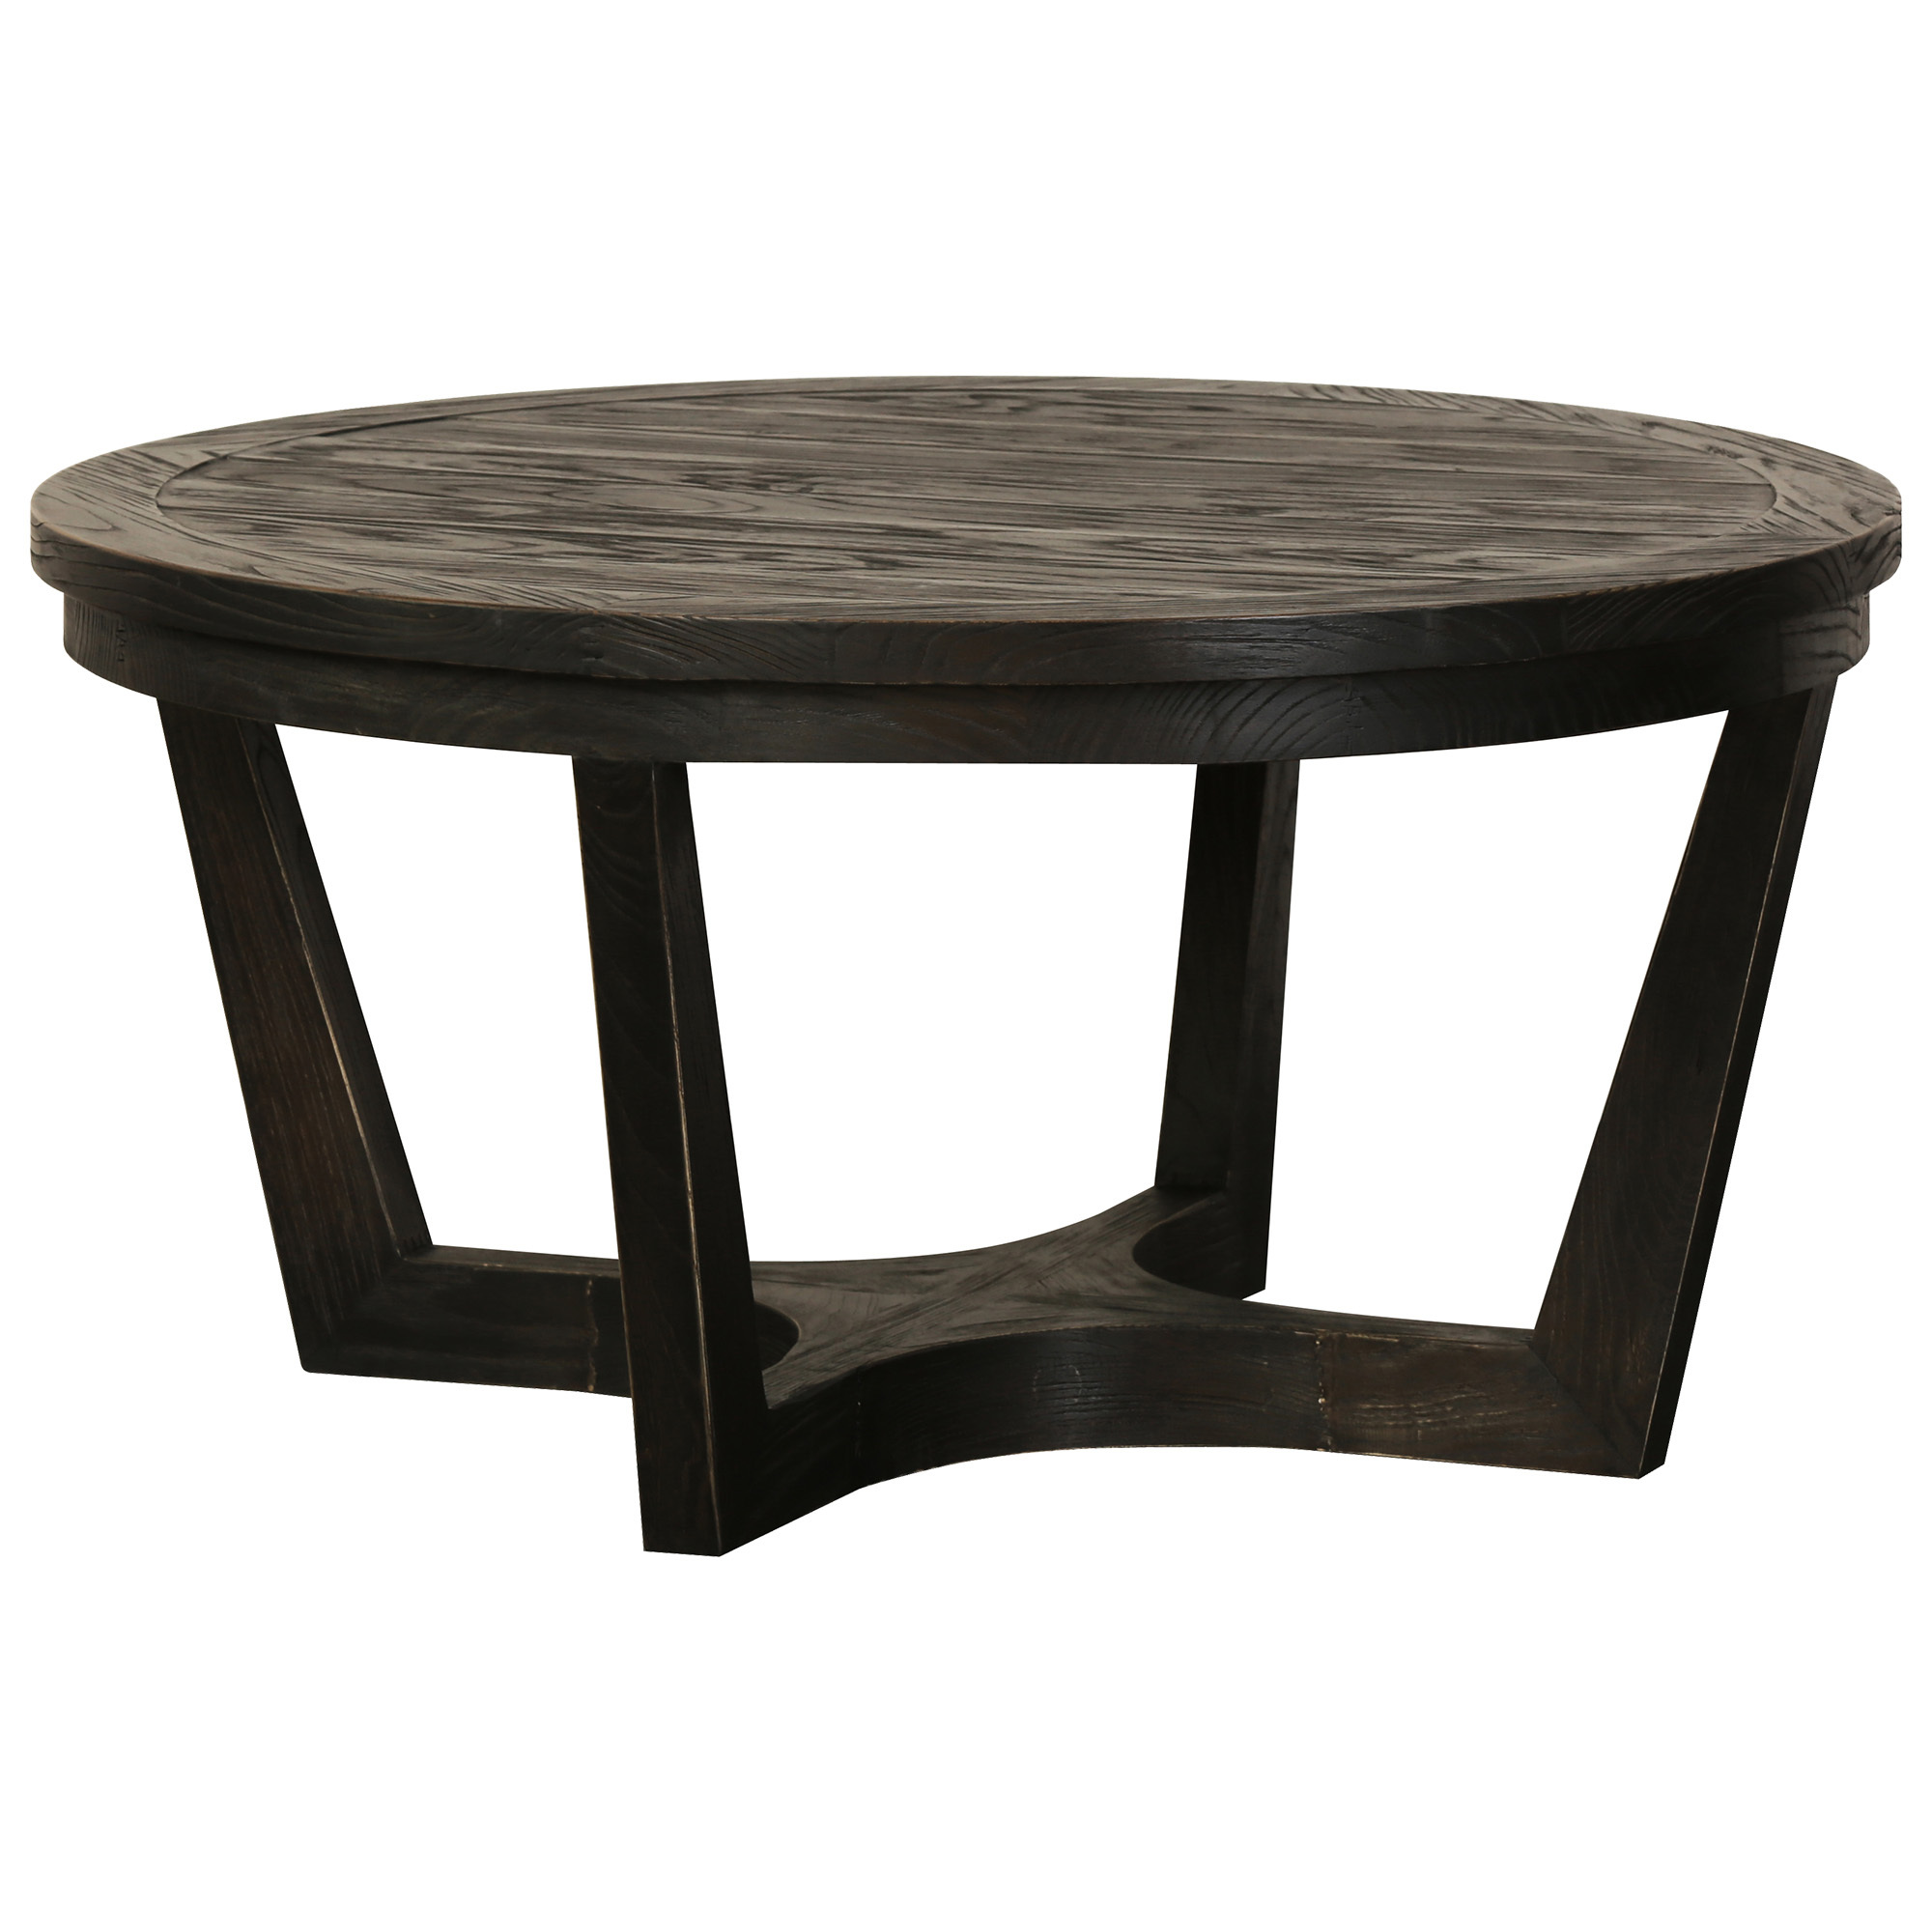 Dark Timber Eaton Reclaimed Wood Coffee Table Temple Webster